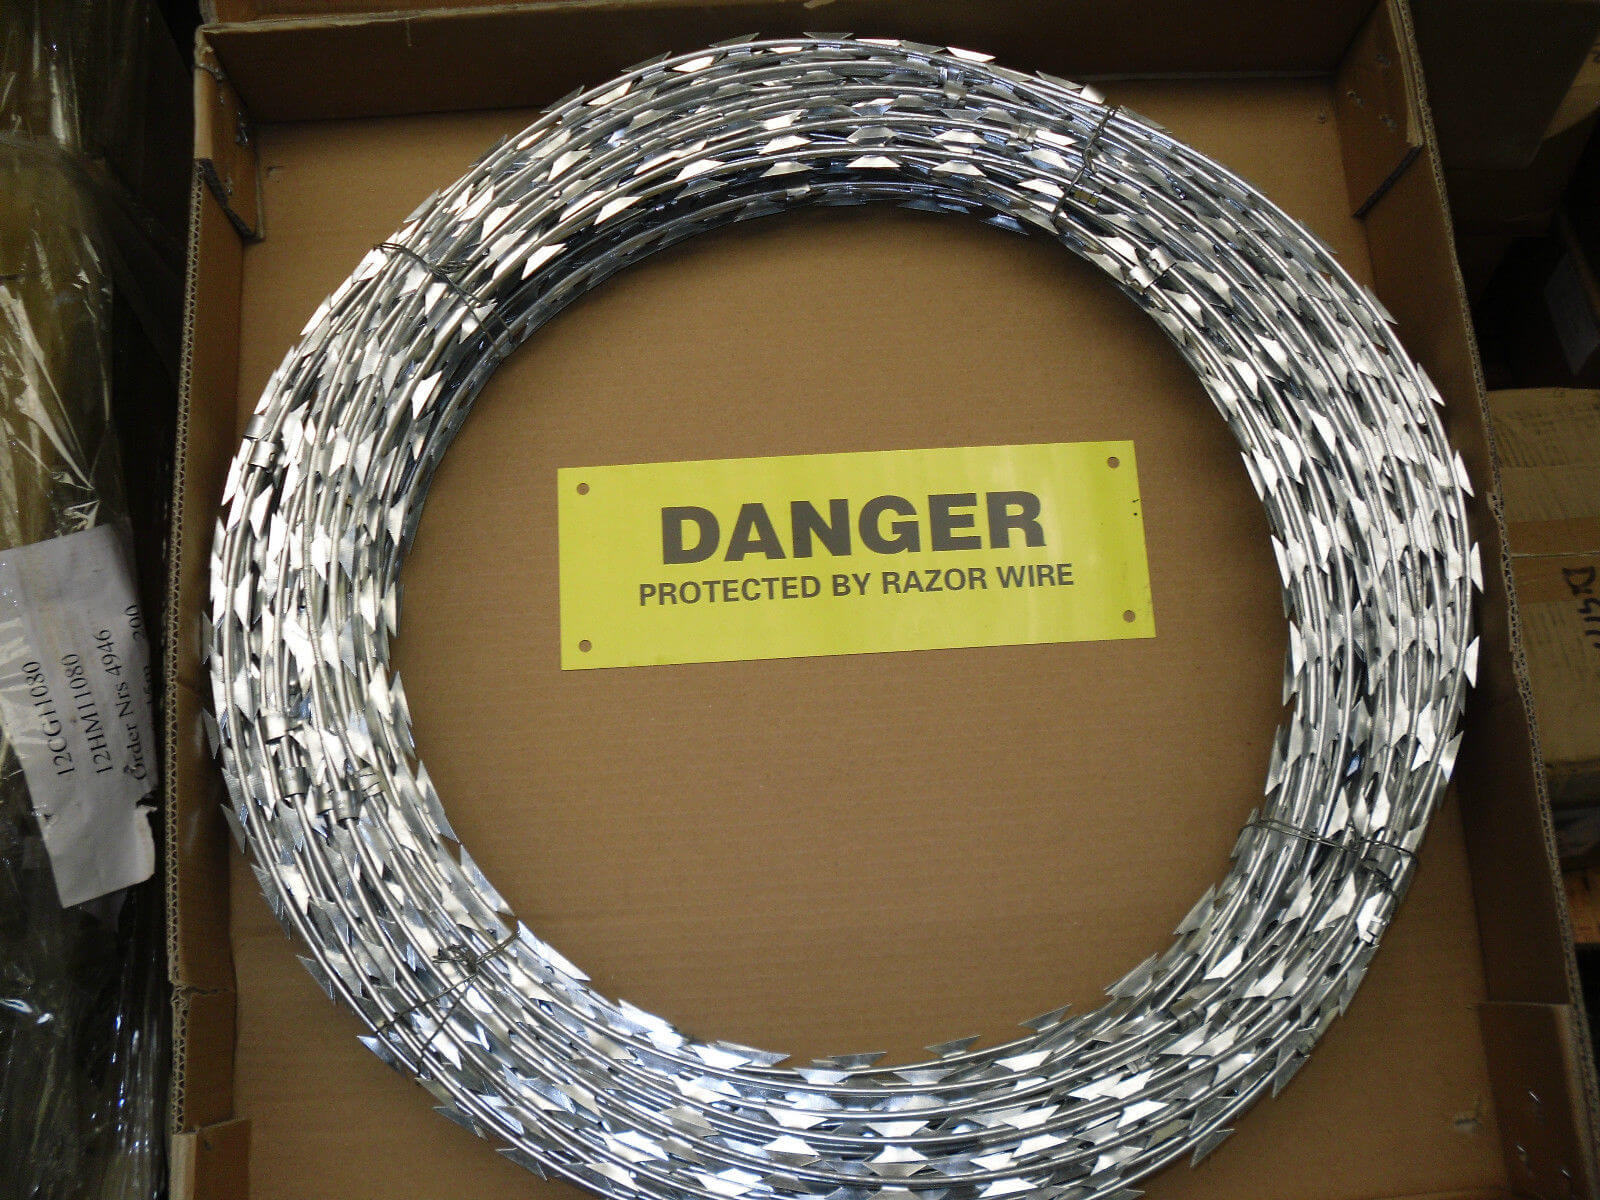 Razor wire - securing your premises like never before